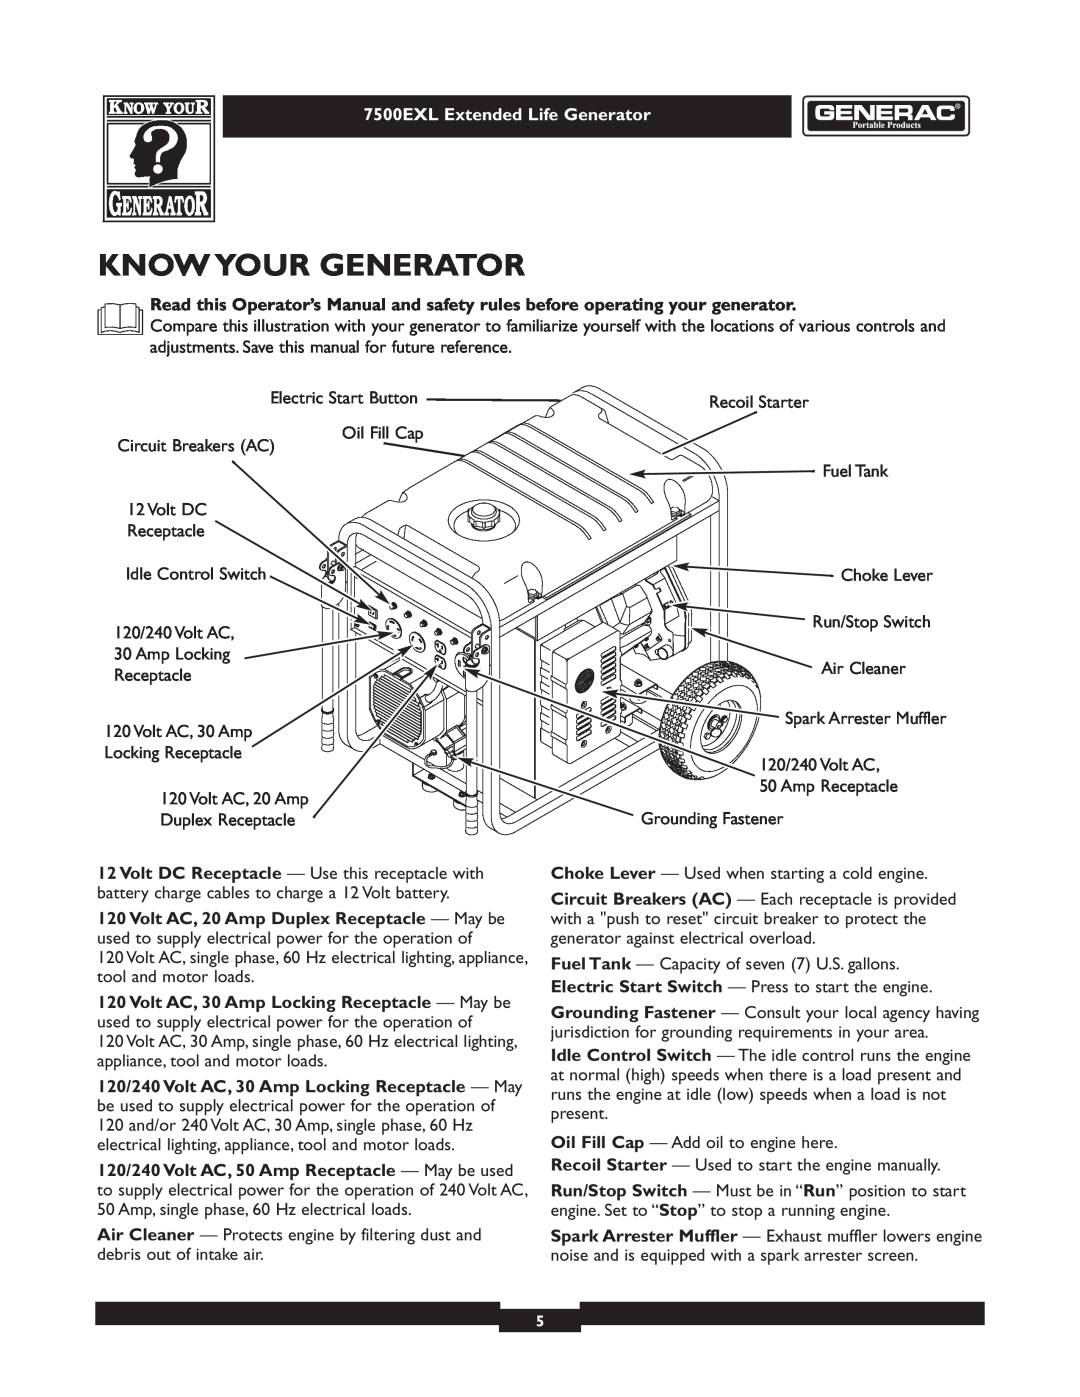 Generac 101 9-3 operating instructions Know Your Generator, 7500EXL Extended Life Generator 